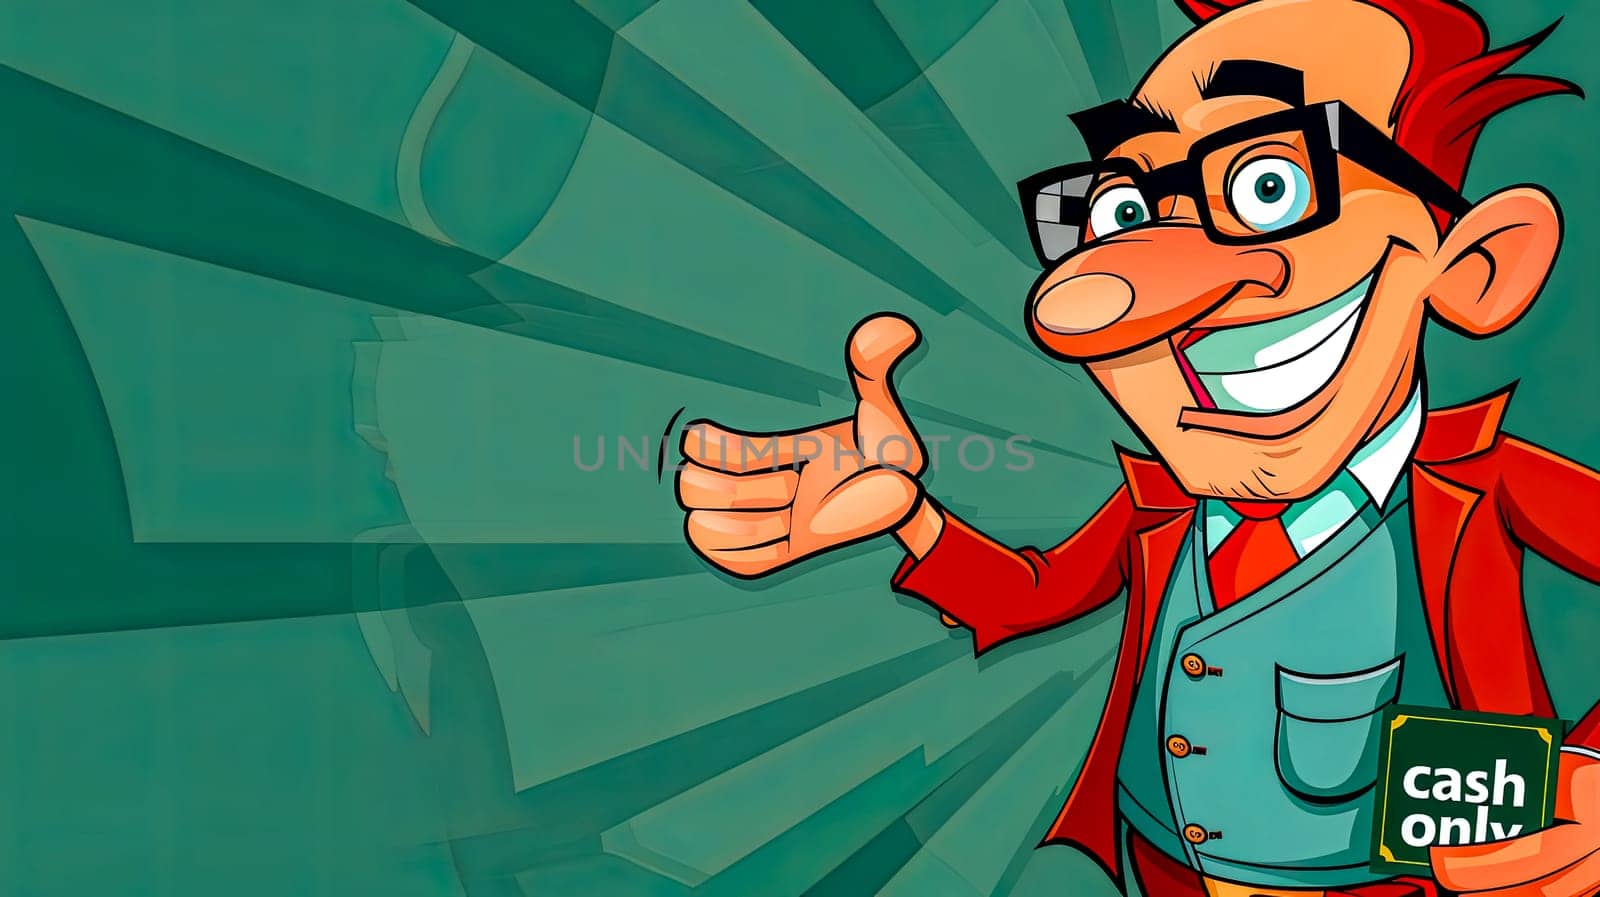 Vibrant illustration of a smiling cartoon businessman with a thumbs up gesture